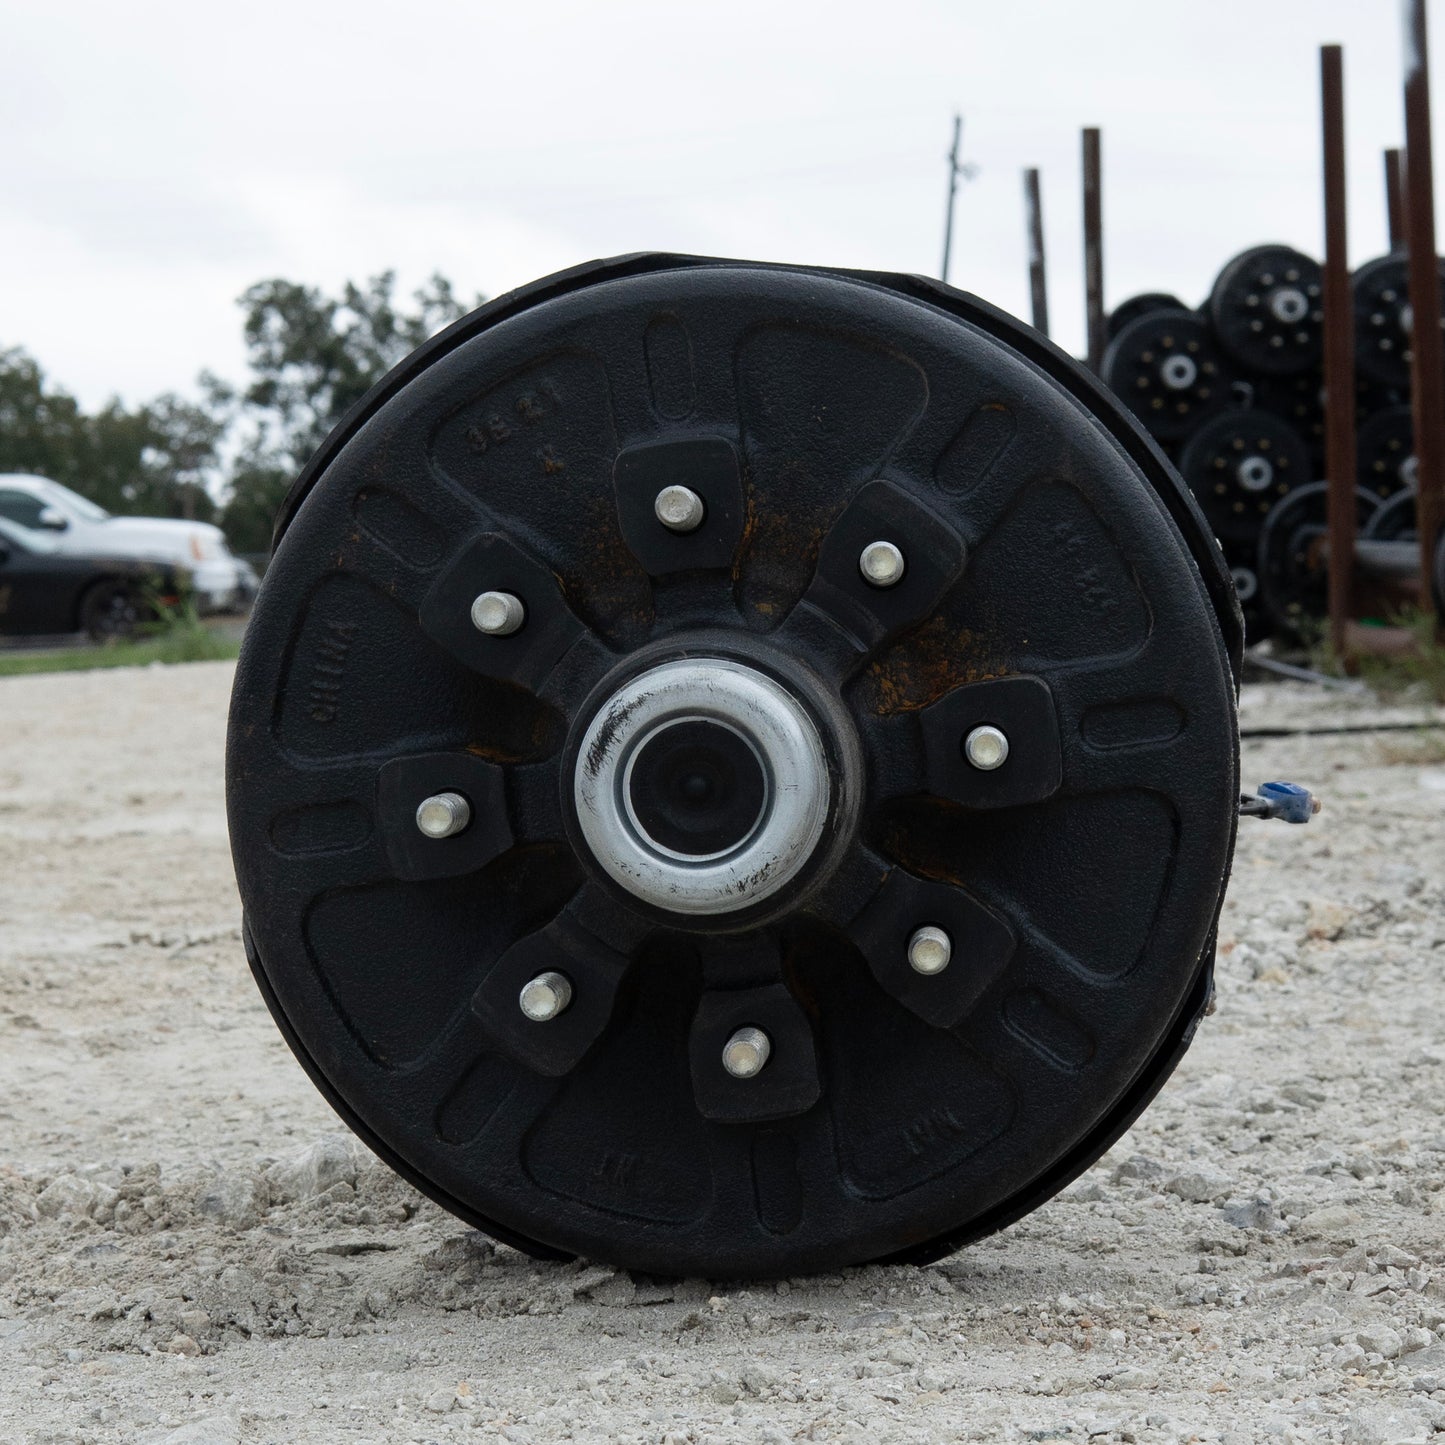 7k TK Trailer Axle - 7000 lb Electric Brake Axle 8 lug 9/16" Studs - Items Sold As Is - The Trailer Parts Outlet